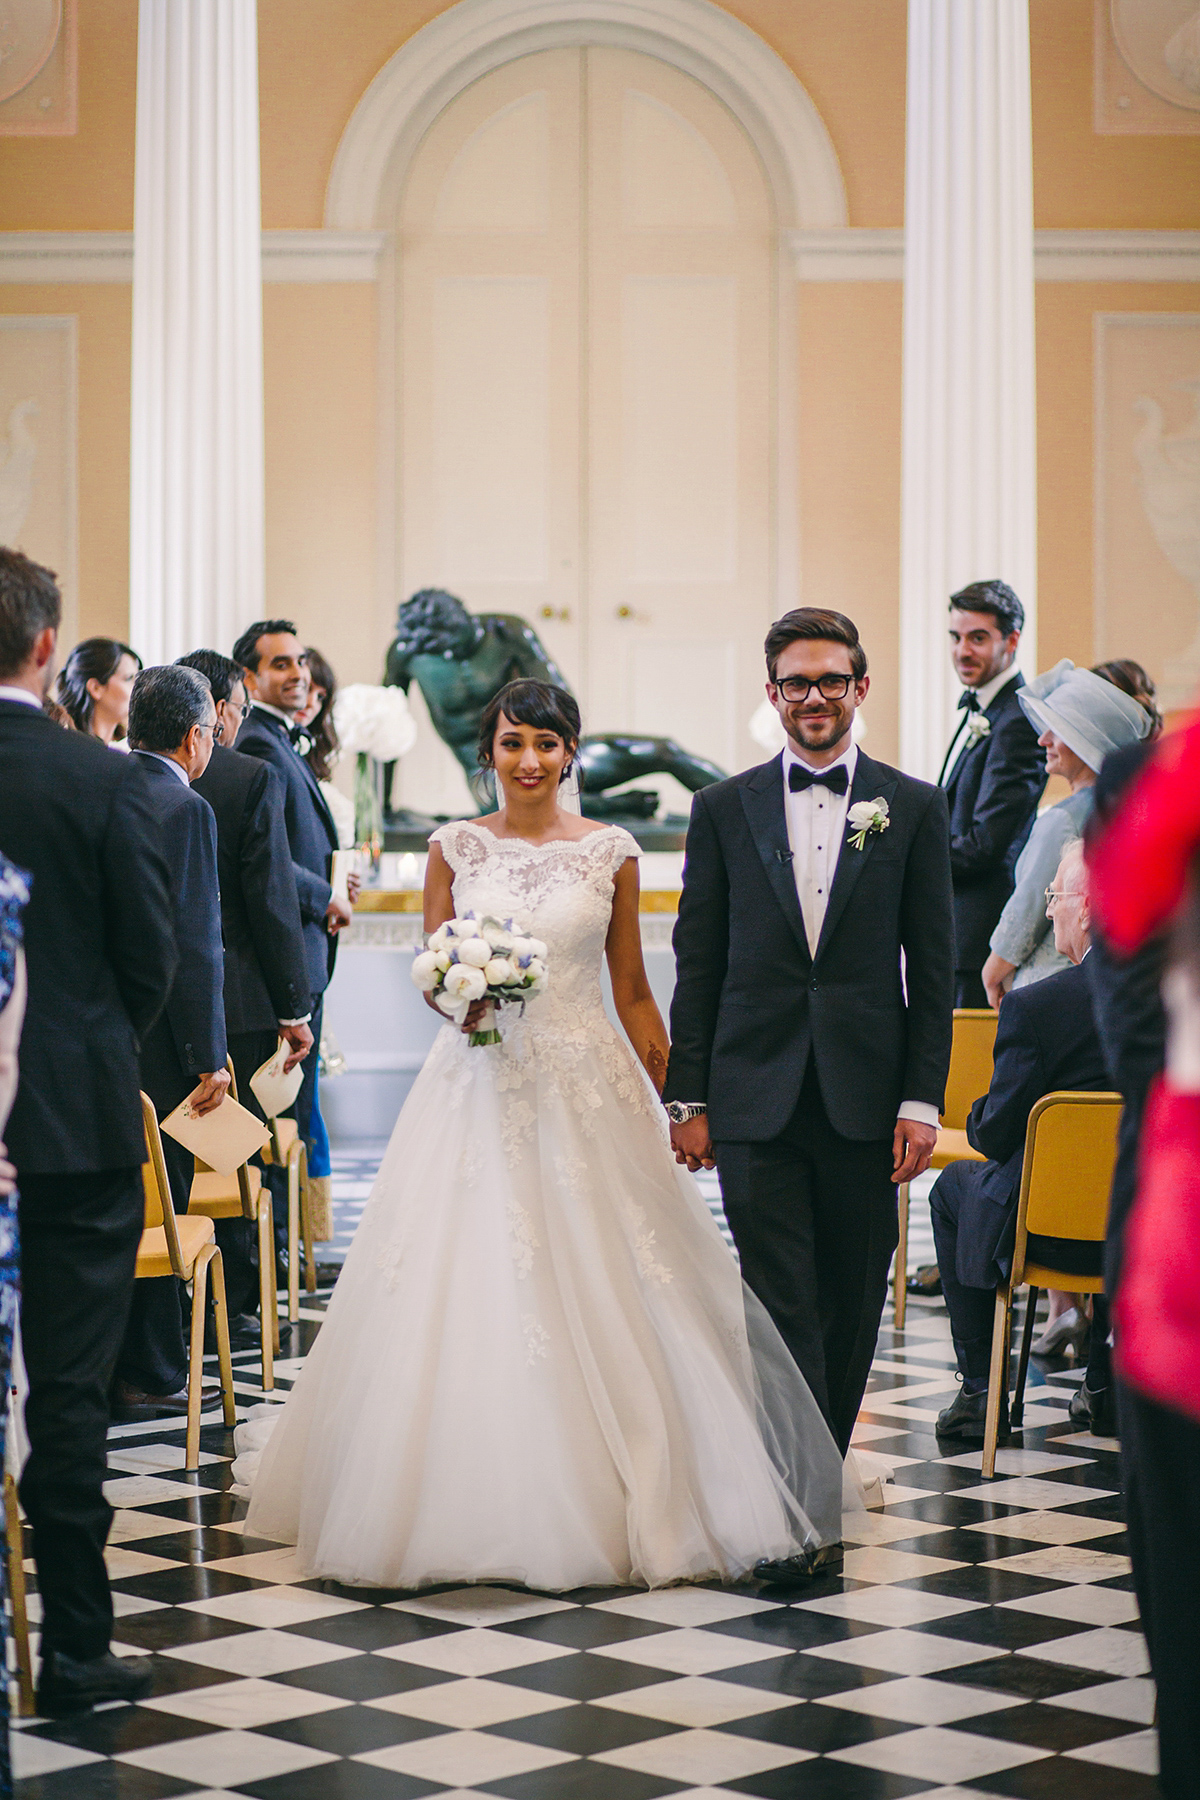 Sabrina and Nick had a multicultural wedding including an Anglican and Hindu ceremony at Syon Park in London. Sabrina wore Pronovias. Photography by Viva La weddings.